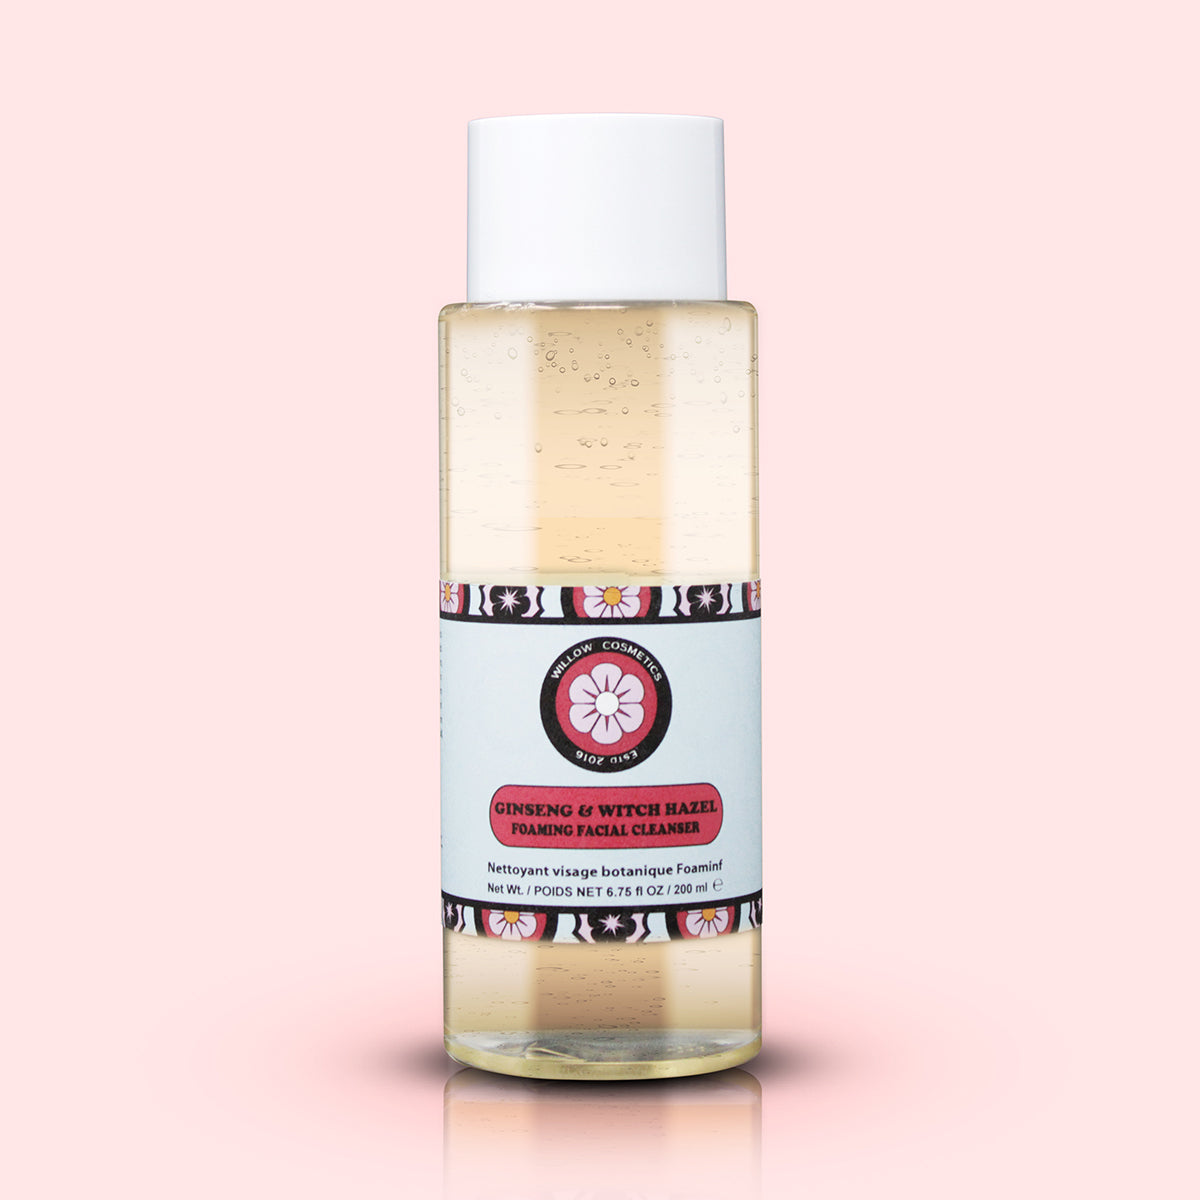 Ginseng & Witch Hazel Foaming Facial Cleanser